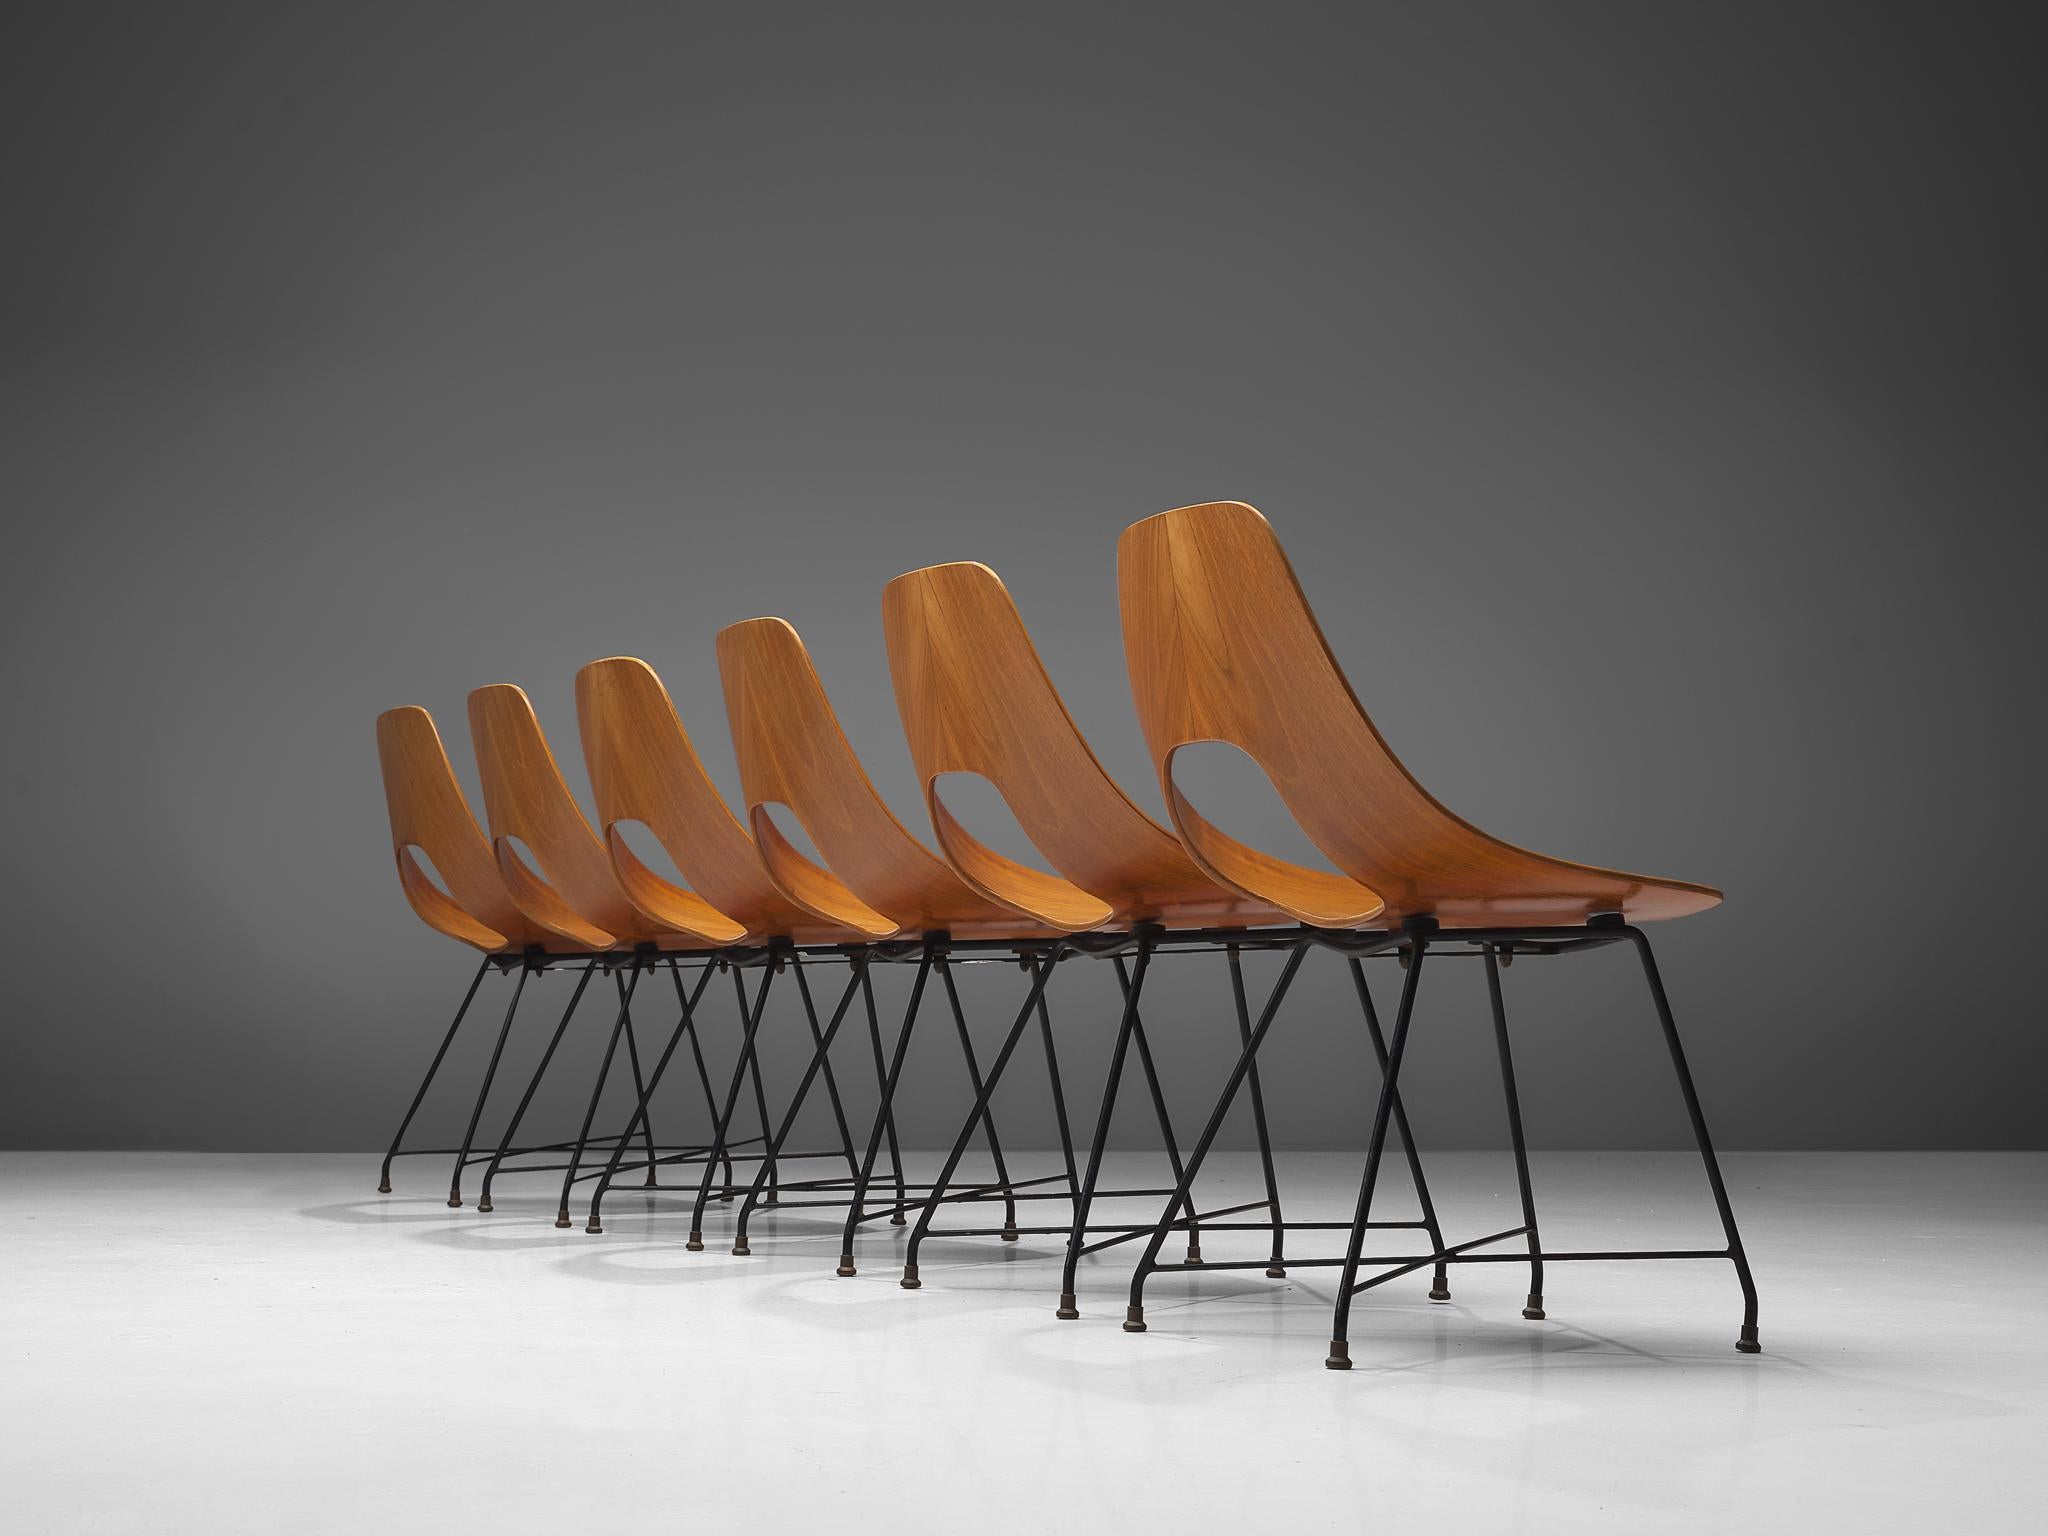 Augusto Bozzi for Saporiti, 'Ariston' dining chairs, teak, steel and brass, Italy, 1957.

Elegant 'Ariston' chairs designed by Augusto Bozzi for Saporiti. The chairs are made out of a solid bend plywood piece of teak in an elegant shape, which